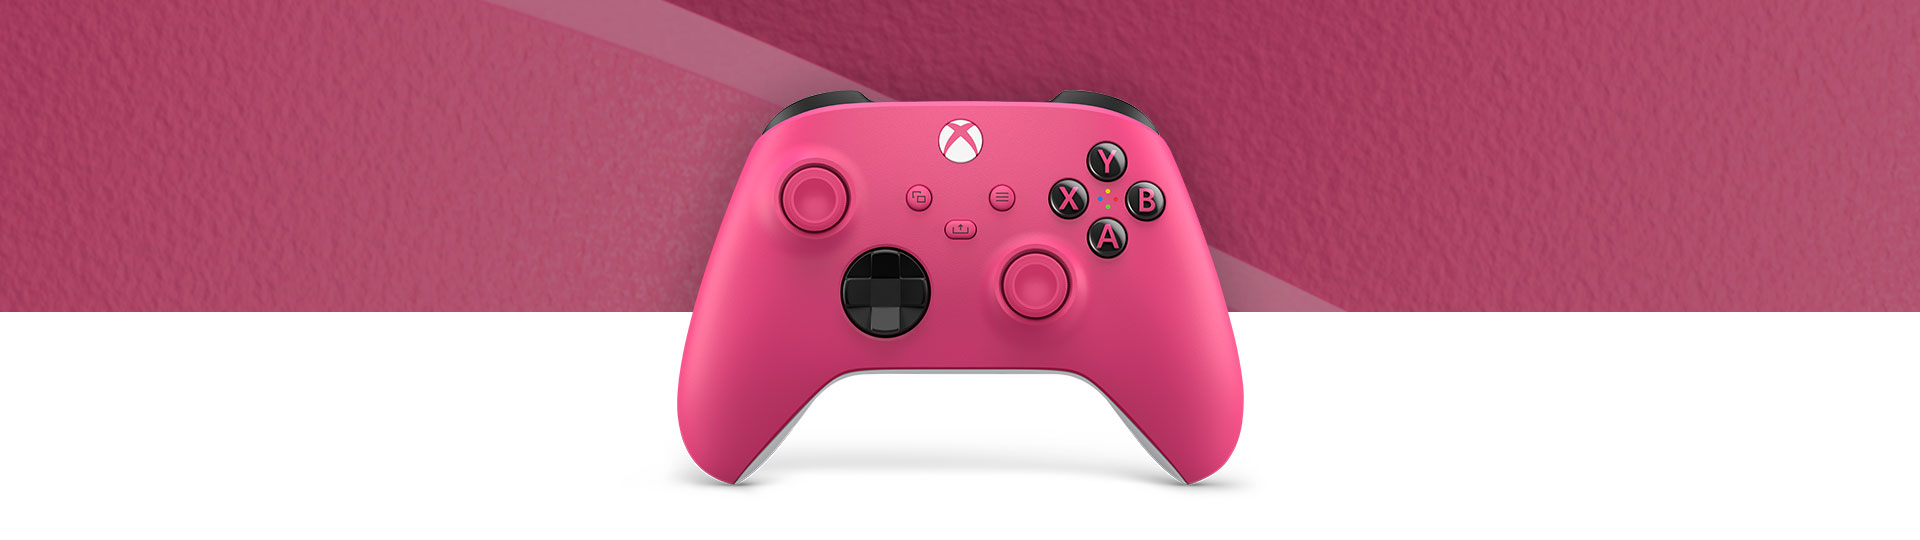 Xbox Wireless Controller - Deep Pink in front of a close up of the controller